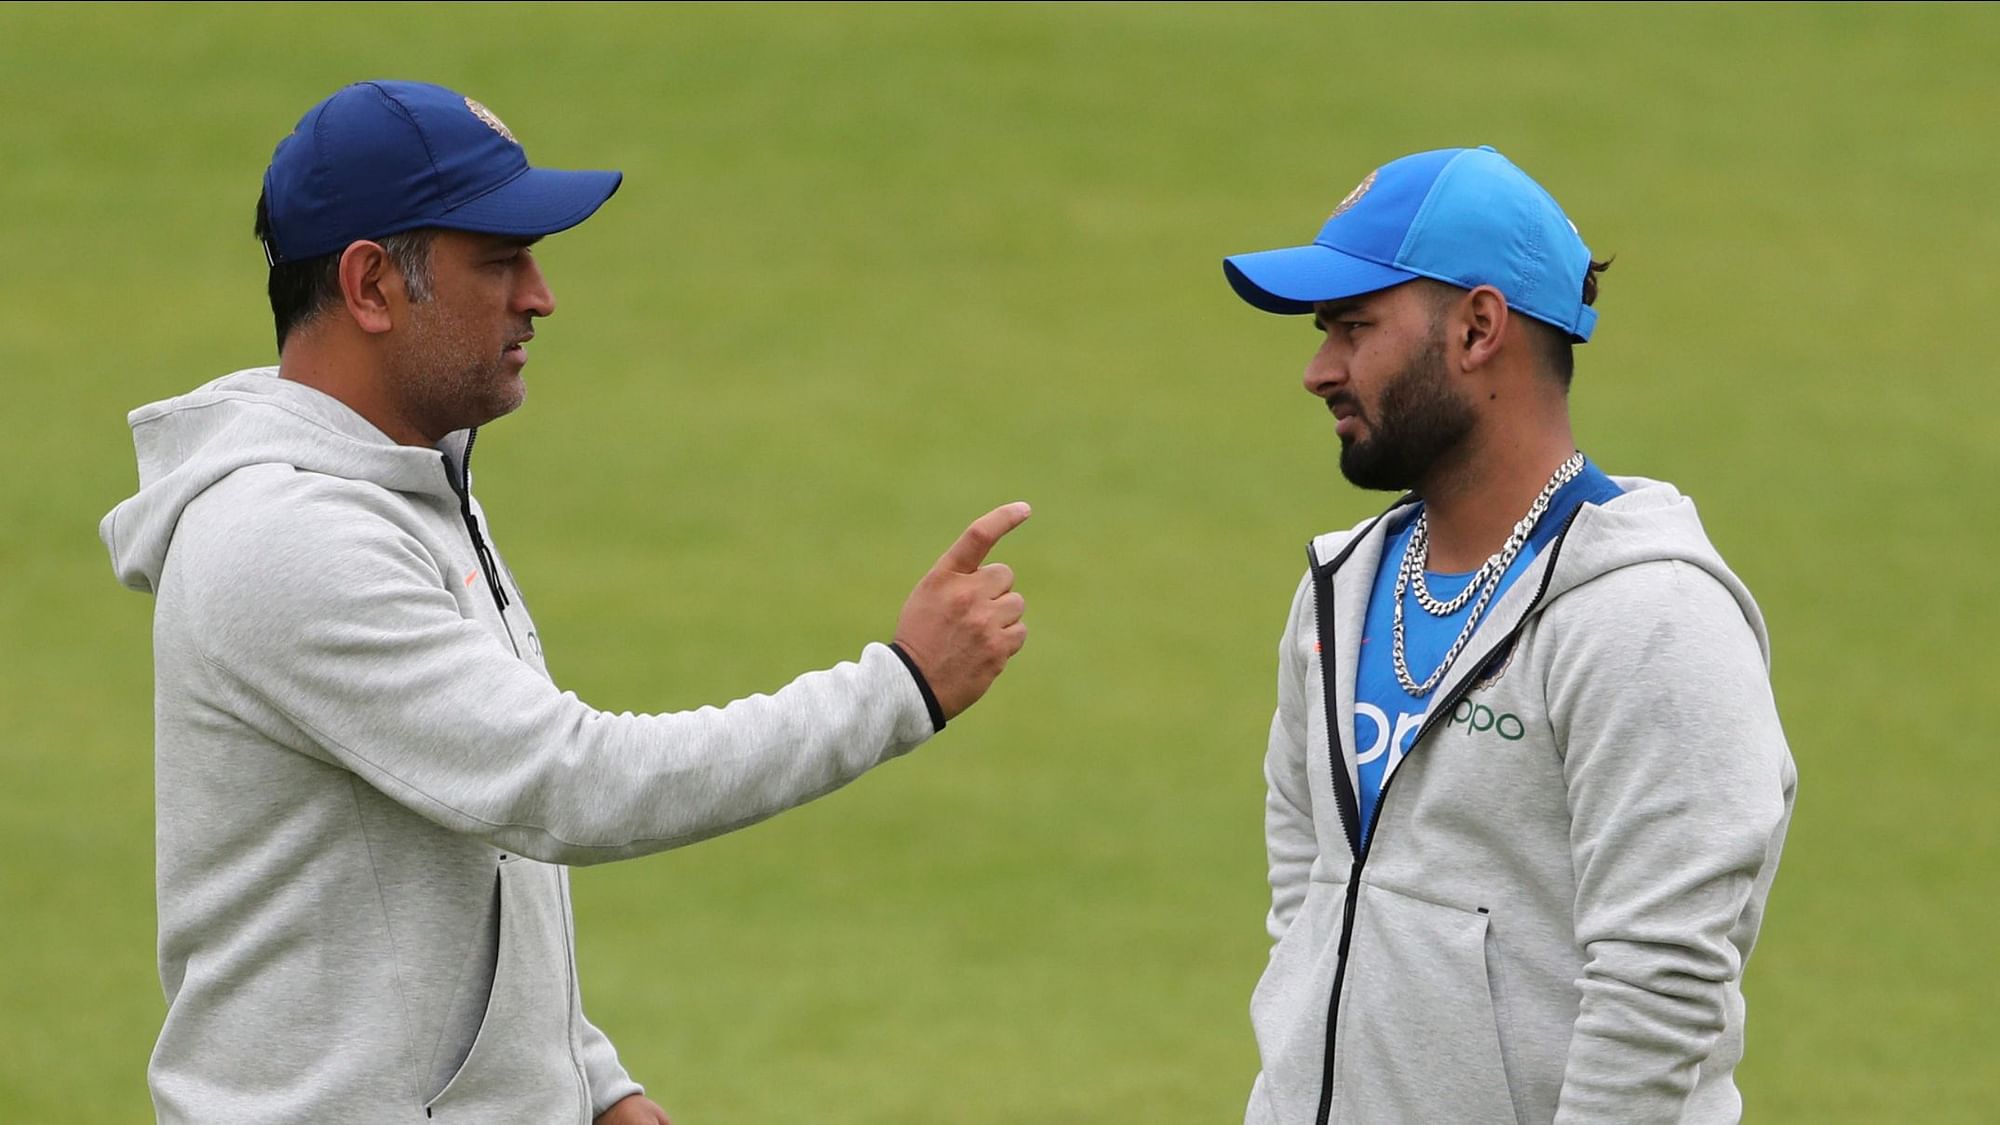 MS Dhoni has been asked by the management to not retire while the team grooms Rishabh Pant.